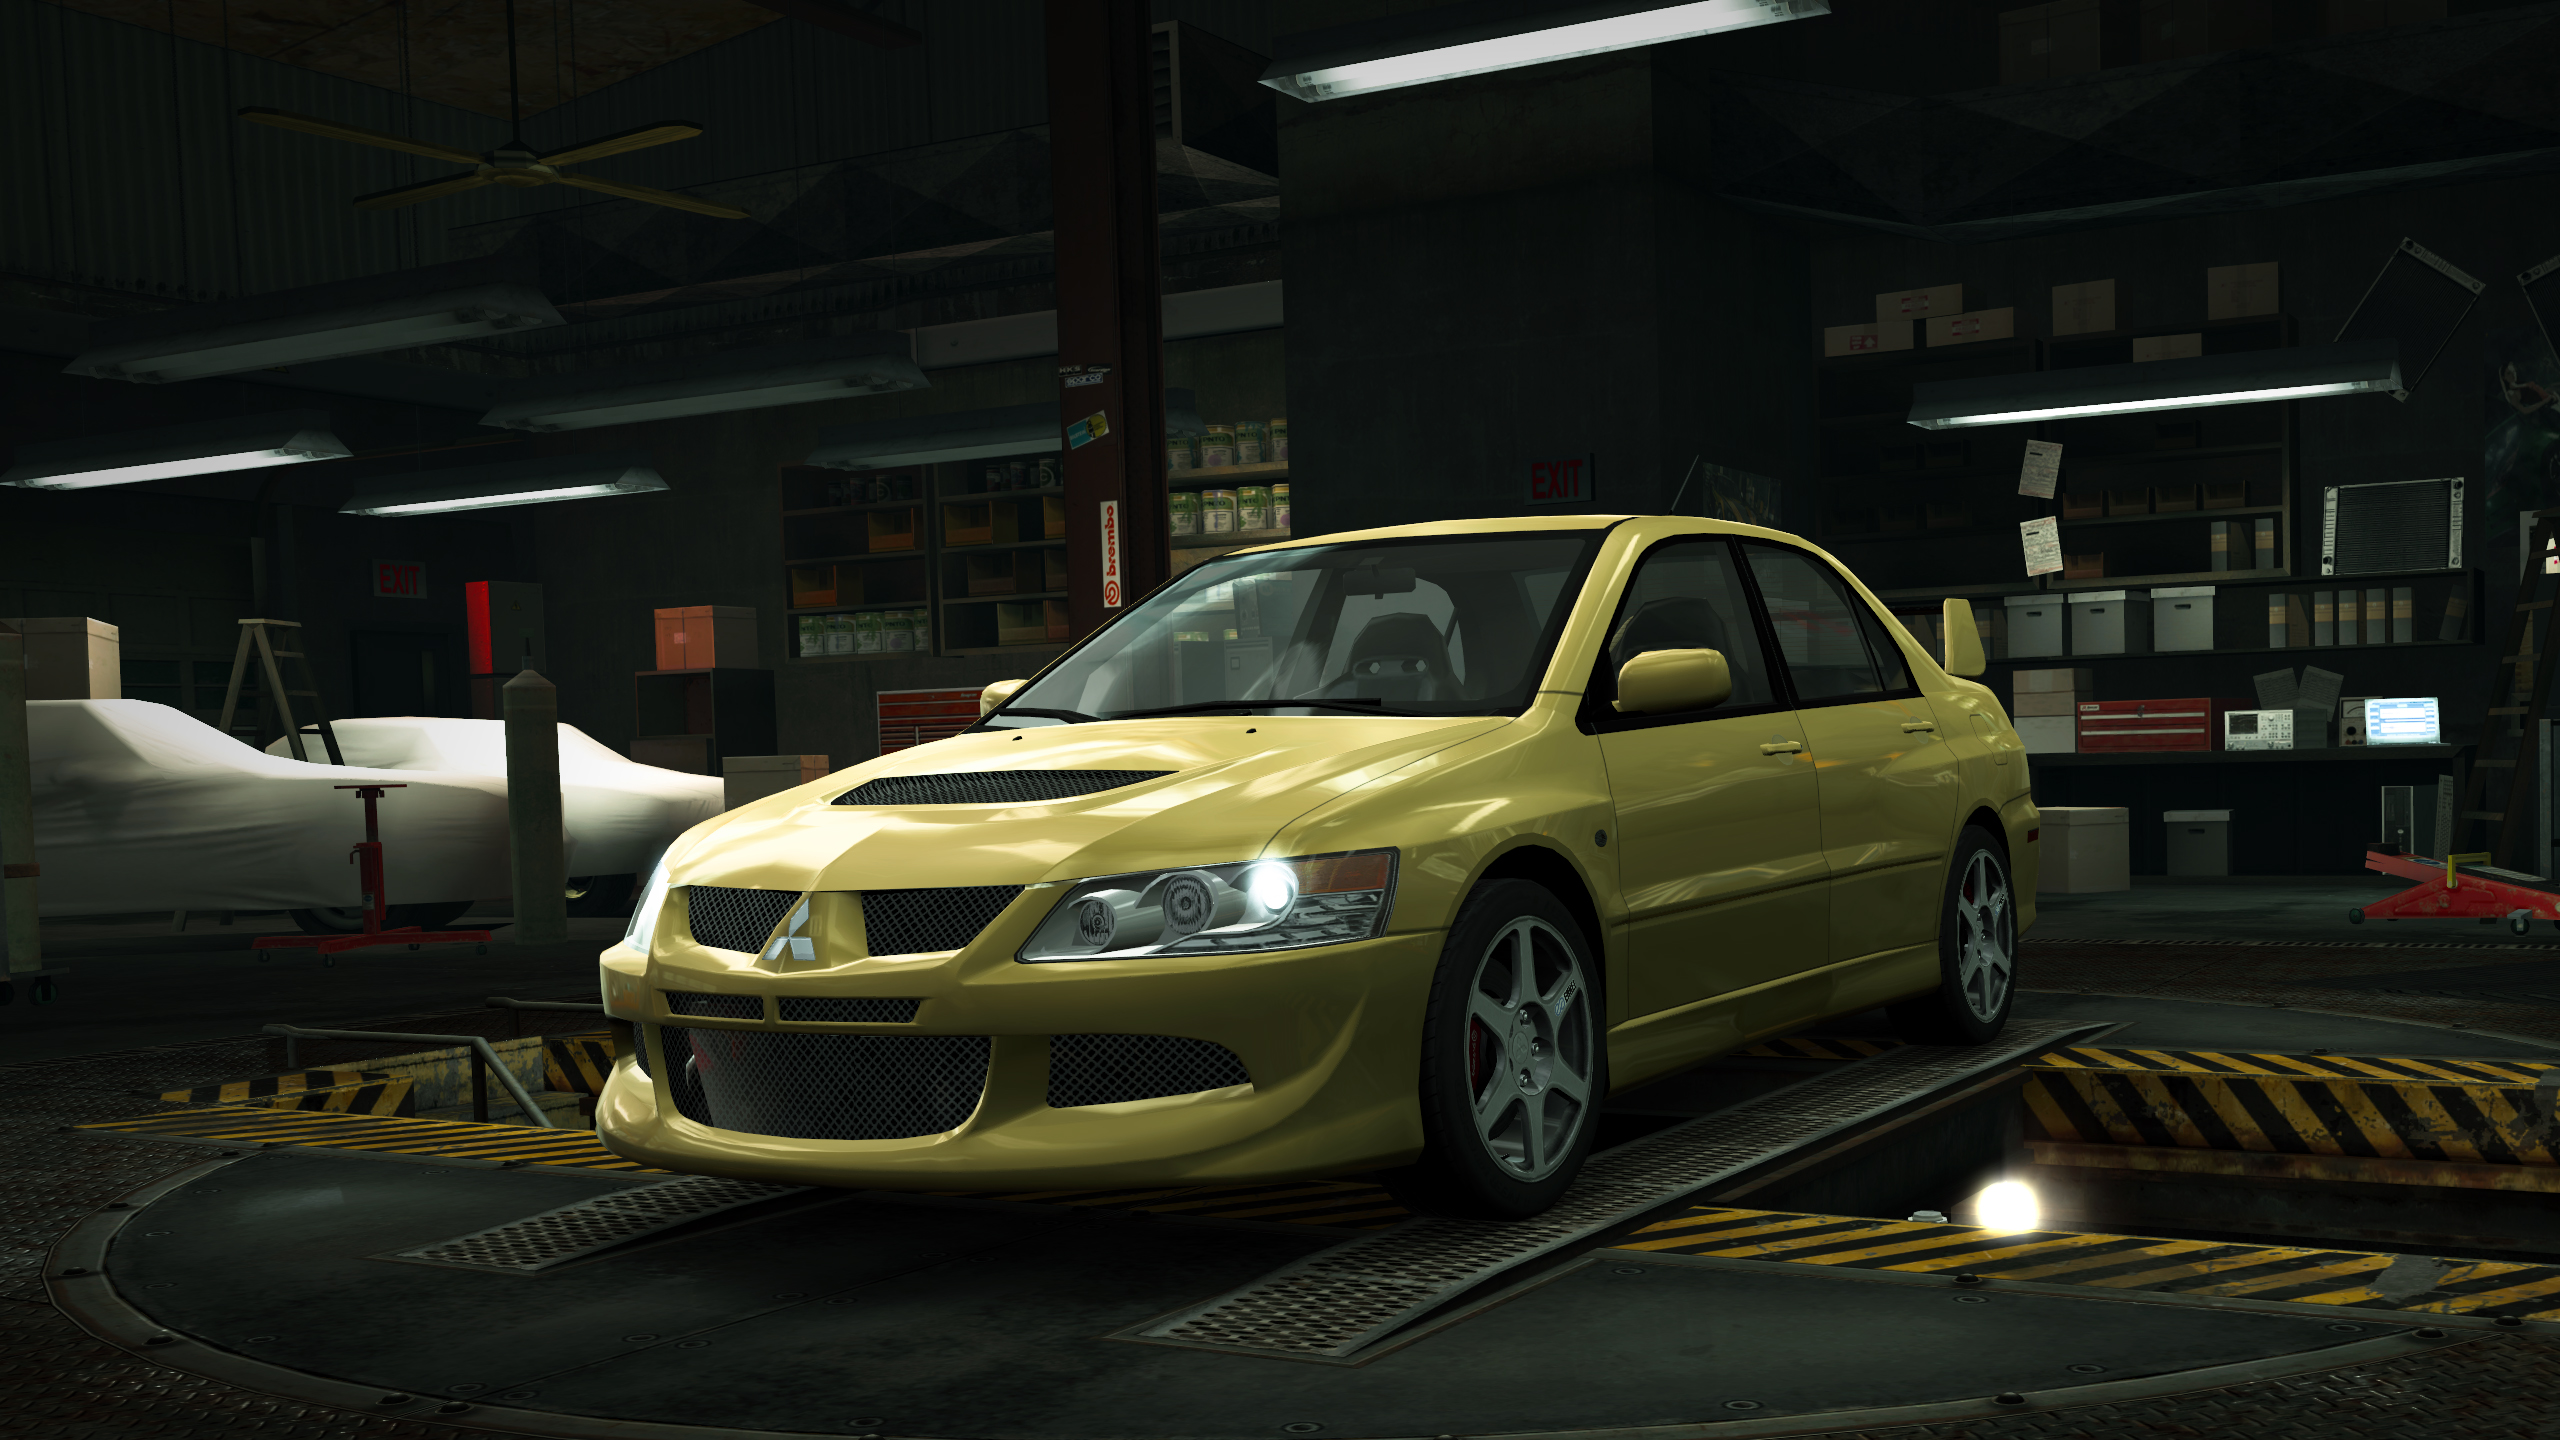 Need for Speed: Underground 2, Need for Speed Wiki